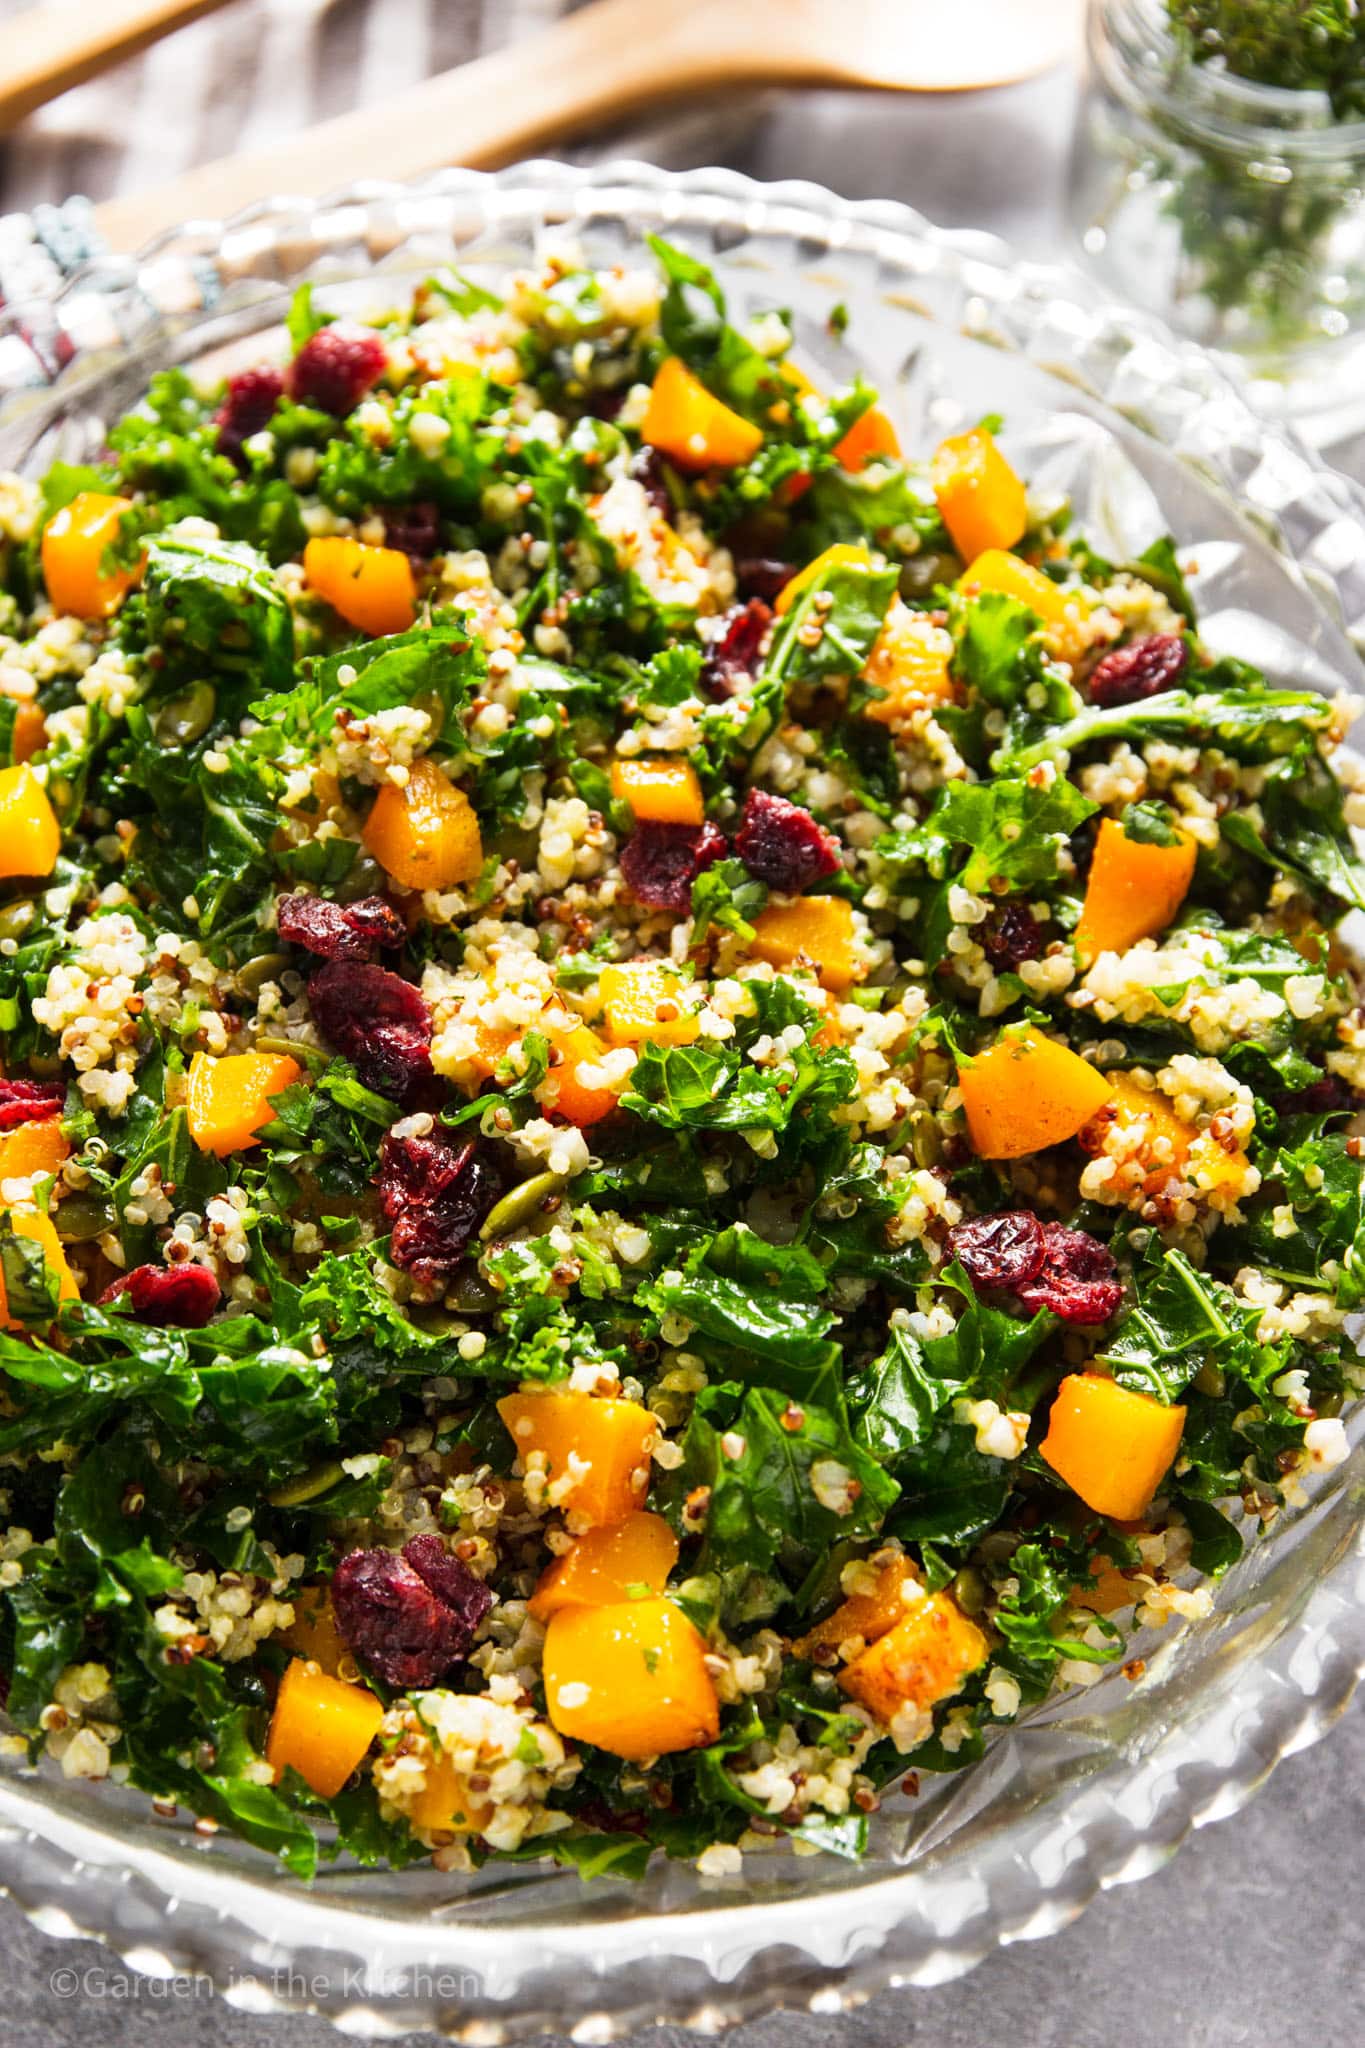 A big bowl of quinoa and kale salad with butternut squash, dried cranberries and pumpkin seeds. Dressing is a green goddess avocado dressing.